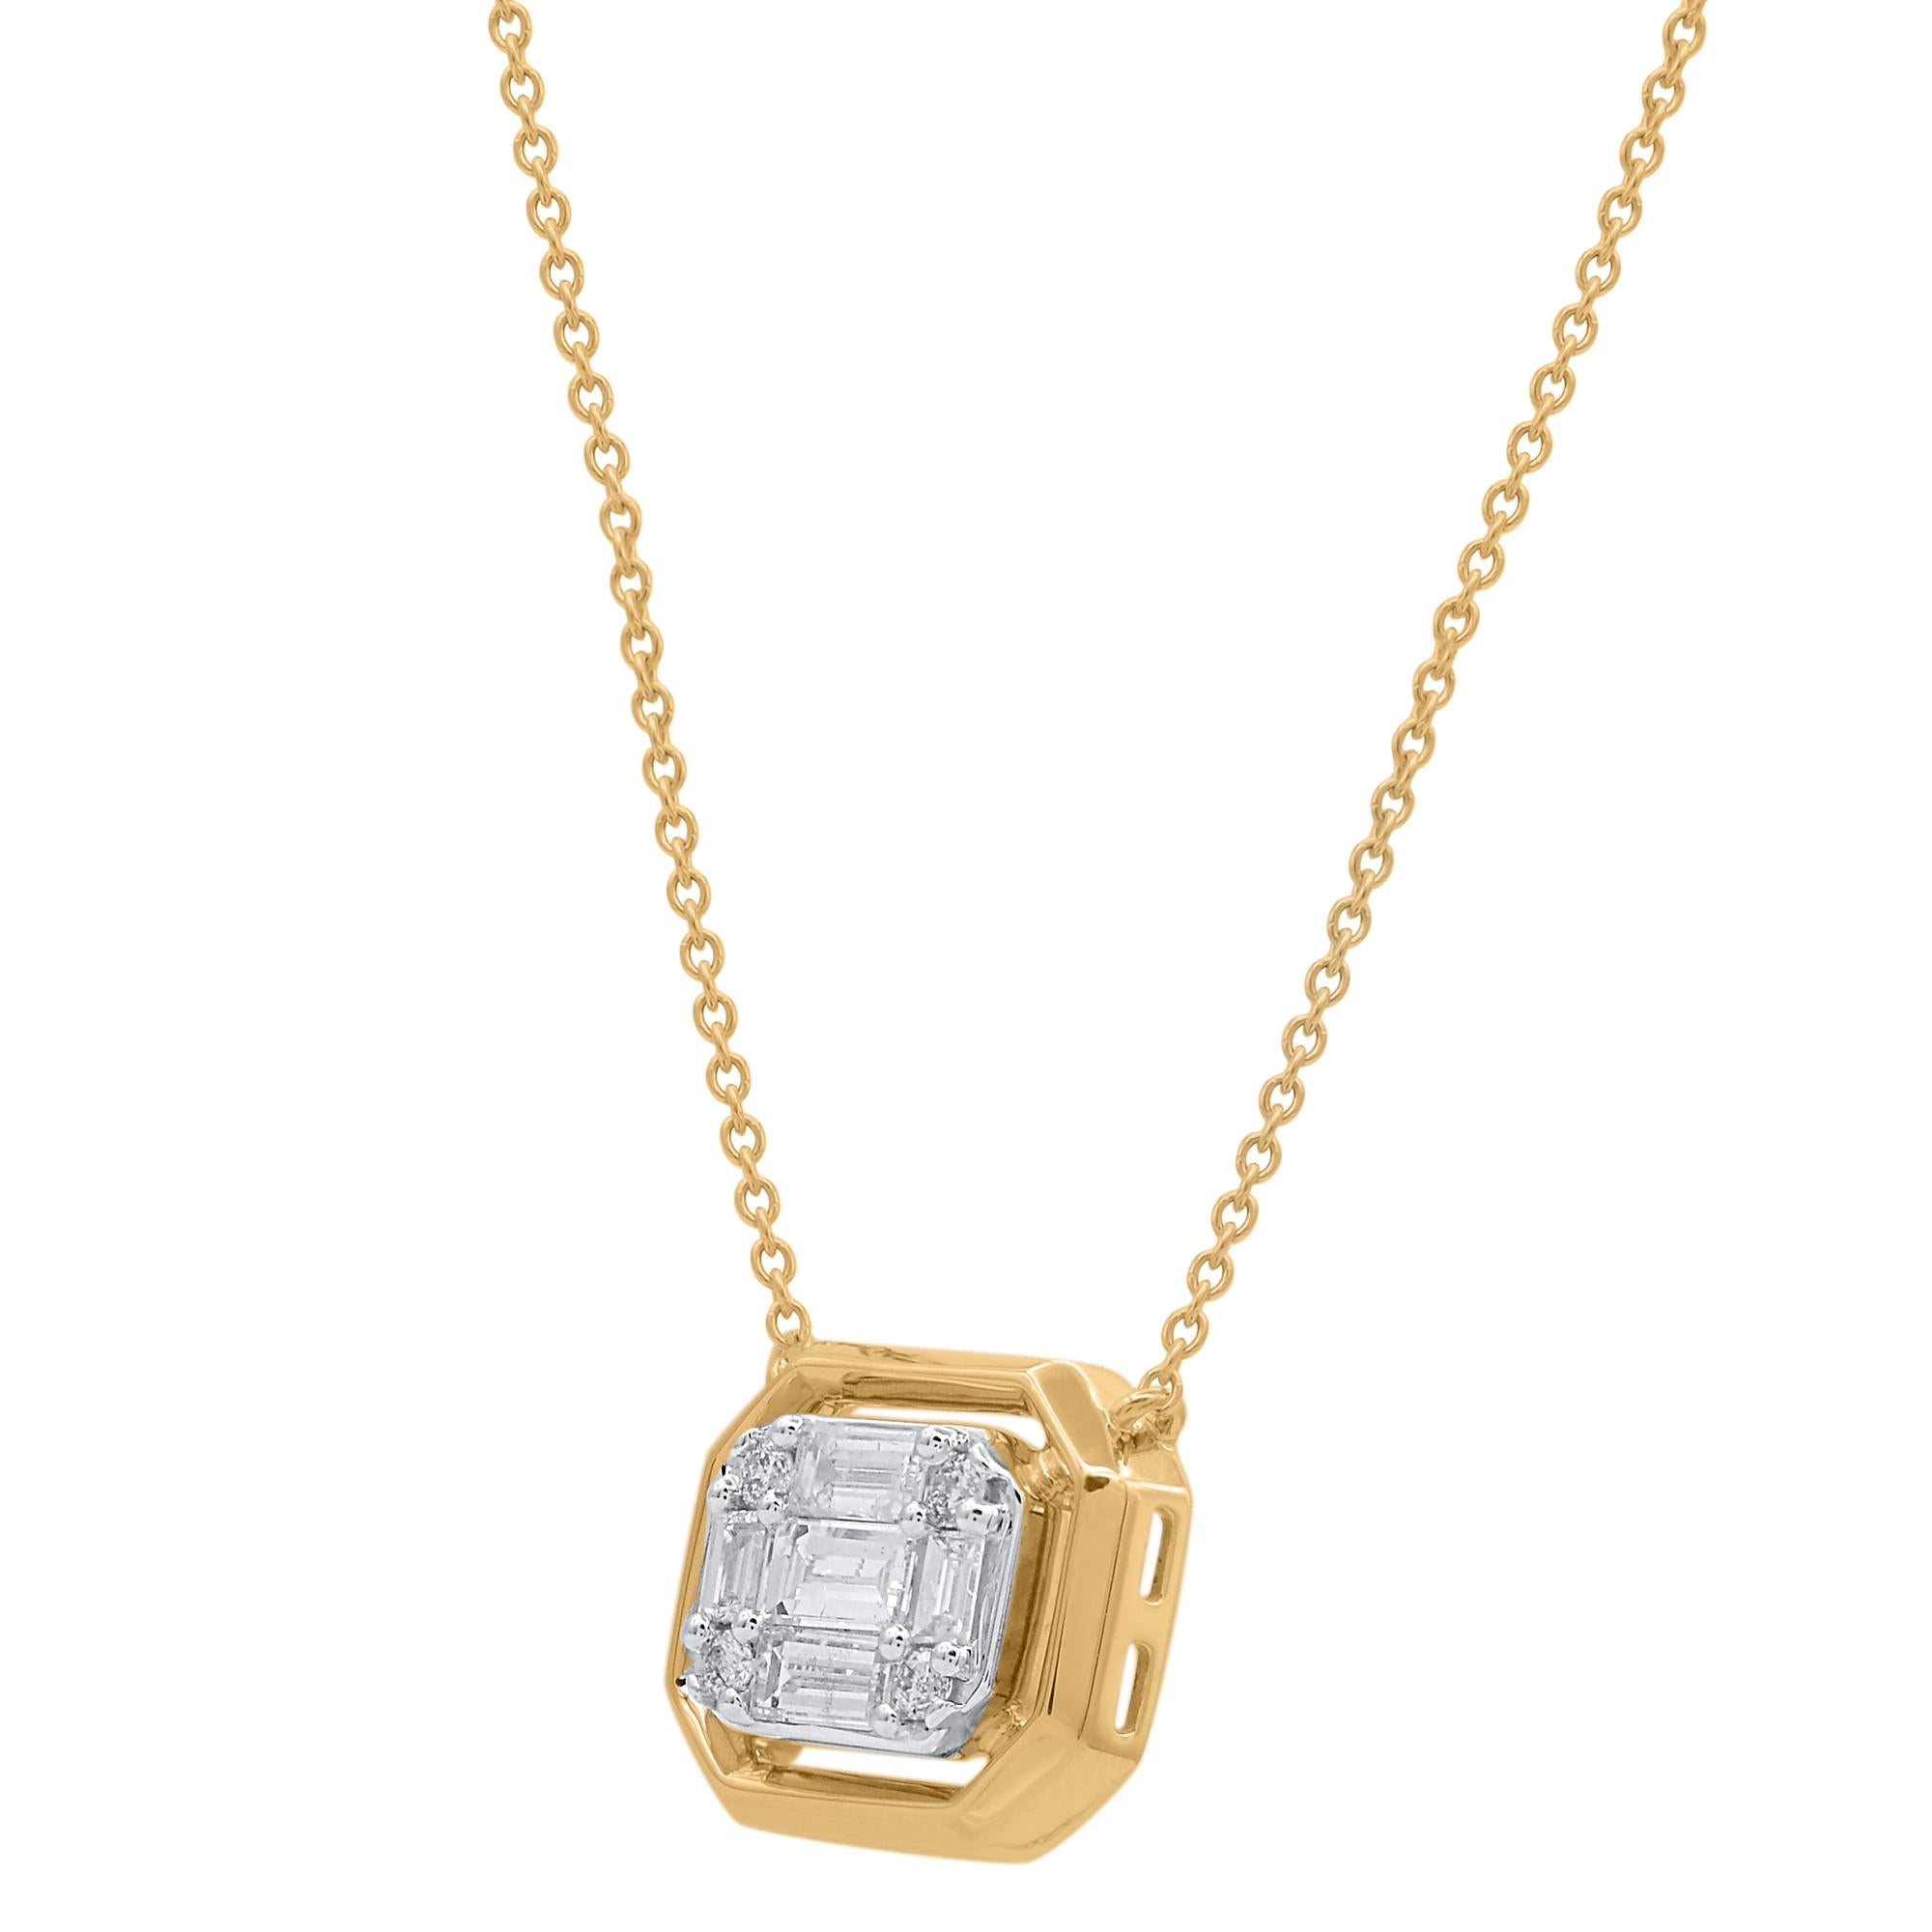 Make a favorable impression with this elegant  diamond pendant. These emerald cut pendant are studded with 4 Brilliant Cut & 5 Baguette diamonds in 18kt yellow gold in prong setting. Diamonds are graded as H-I color and I-2 clarity. Pendant suspends